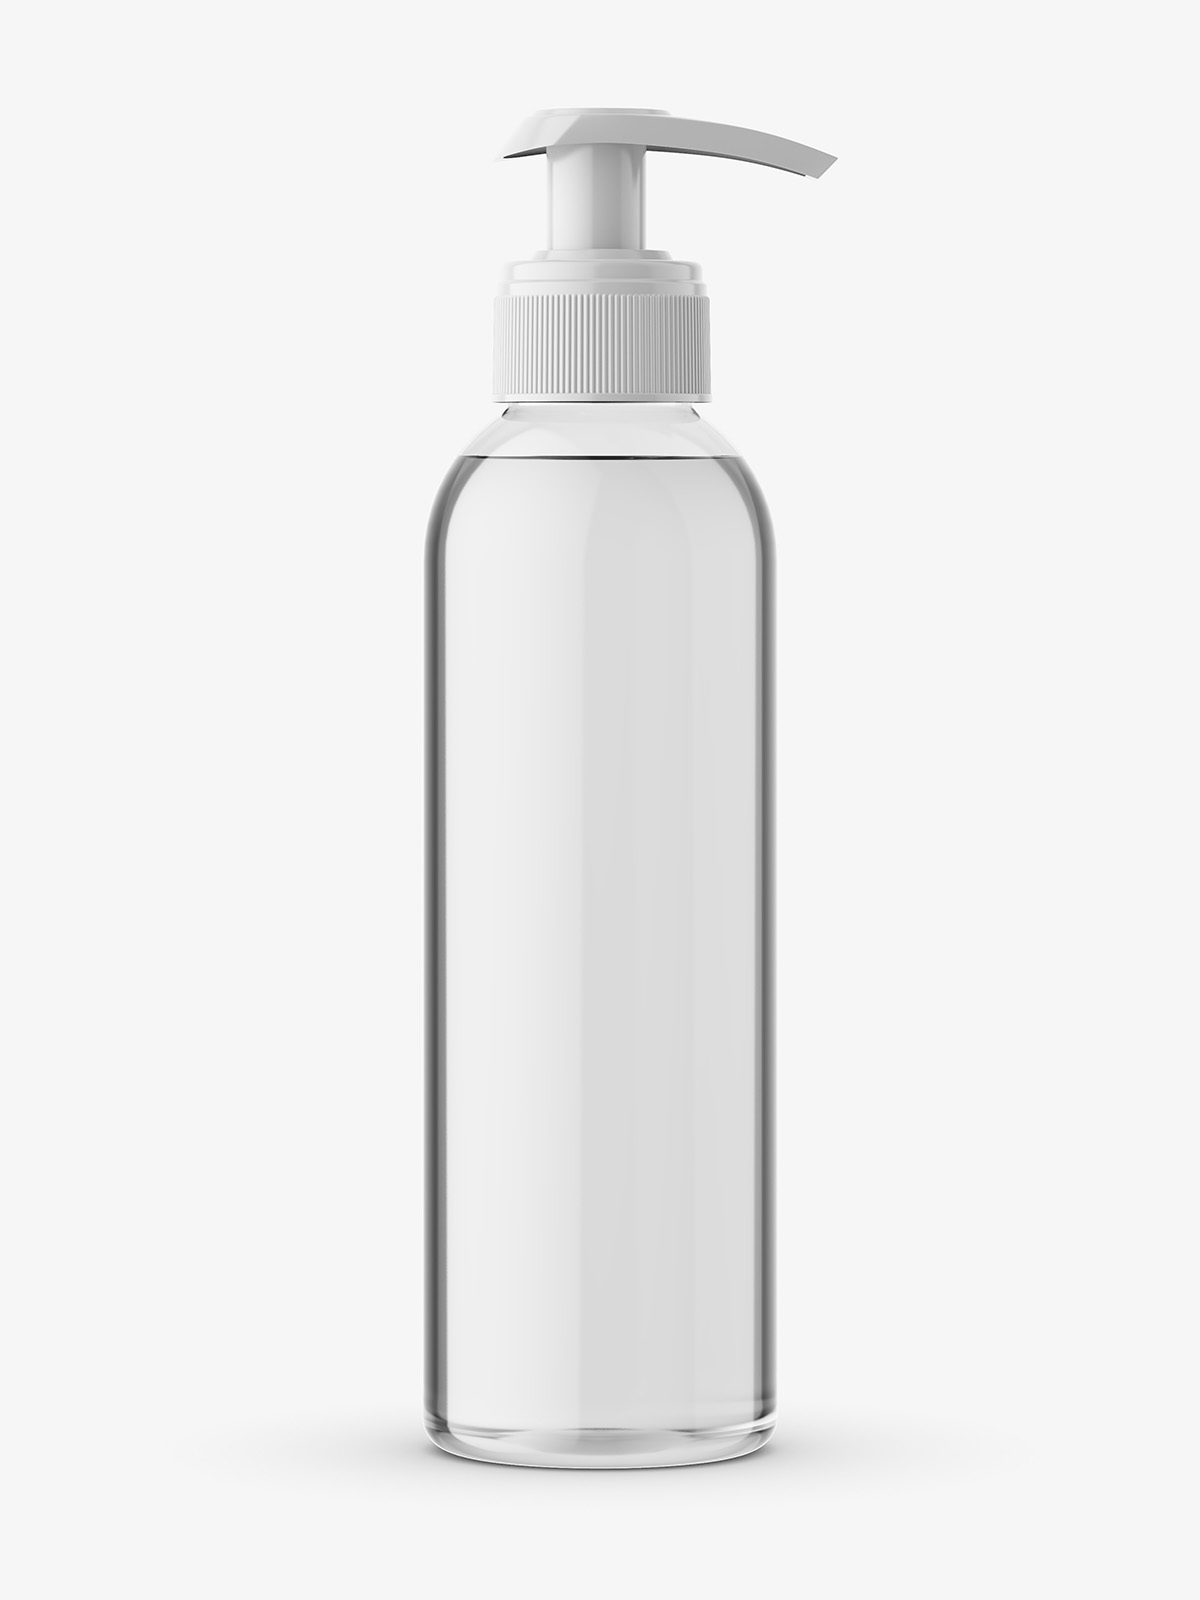 Download Transparent cosmetic bottle with pump mockup - Smarty Mockups